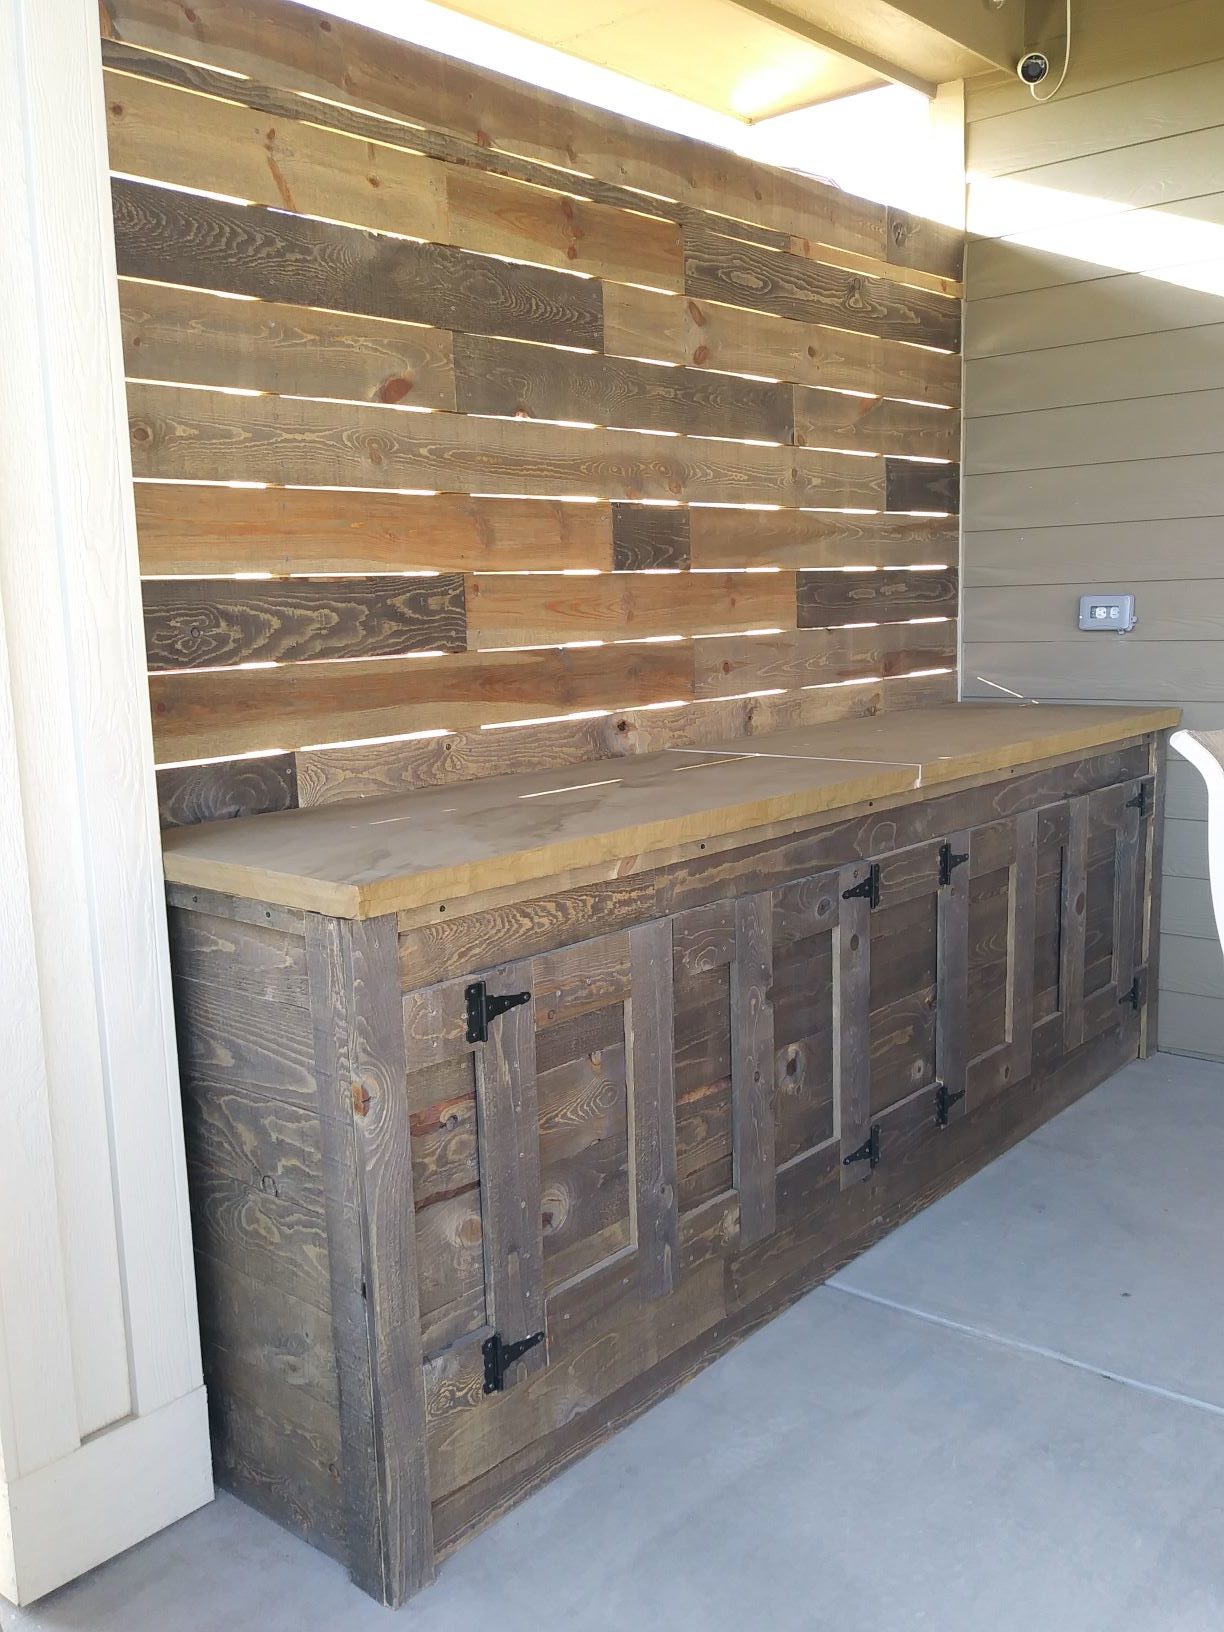 Built in cabinet and counter on back patio.